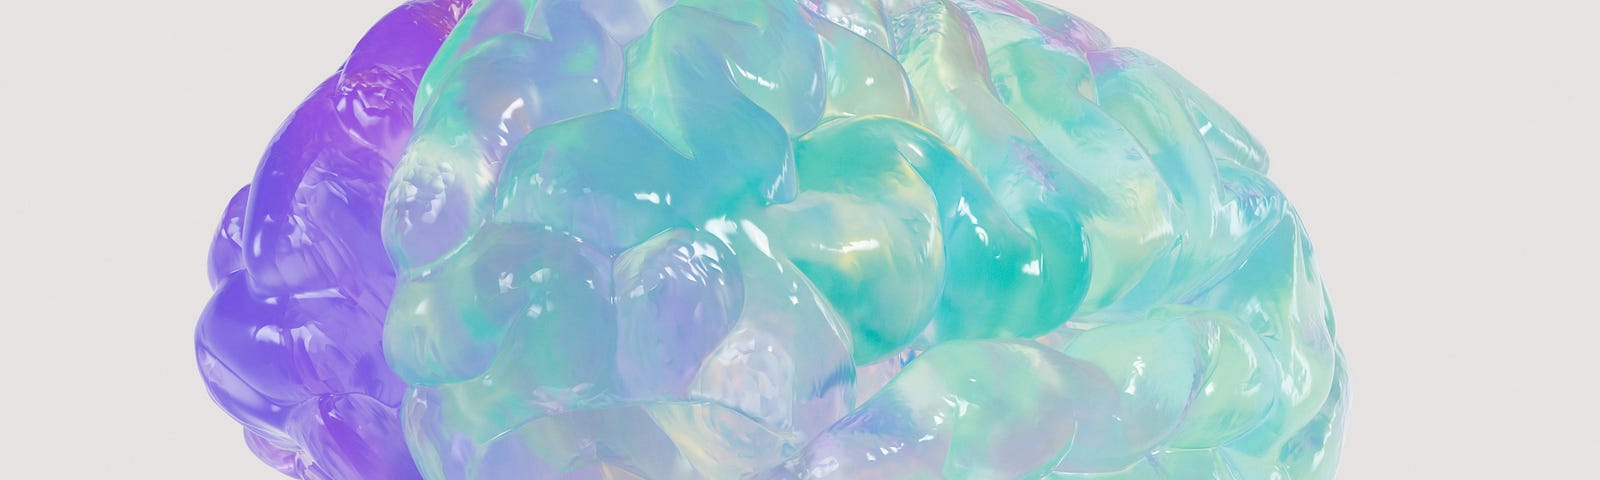 This image is made of clear, pink, blue, purple, and green air-filled bubbles shaped like a brain. I chose it for Six Emotional Enemies Inside Your Mind and How to Abolish Them because it was eye-catching.